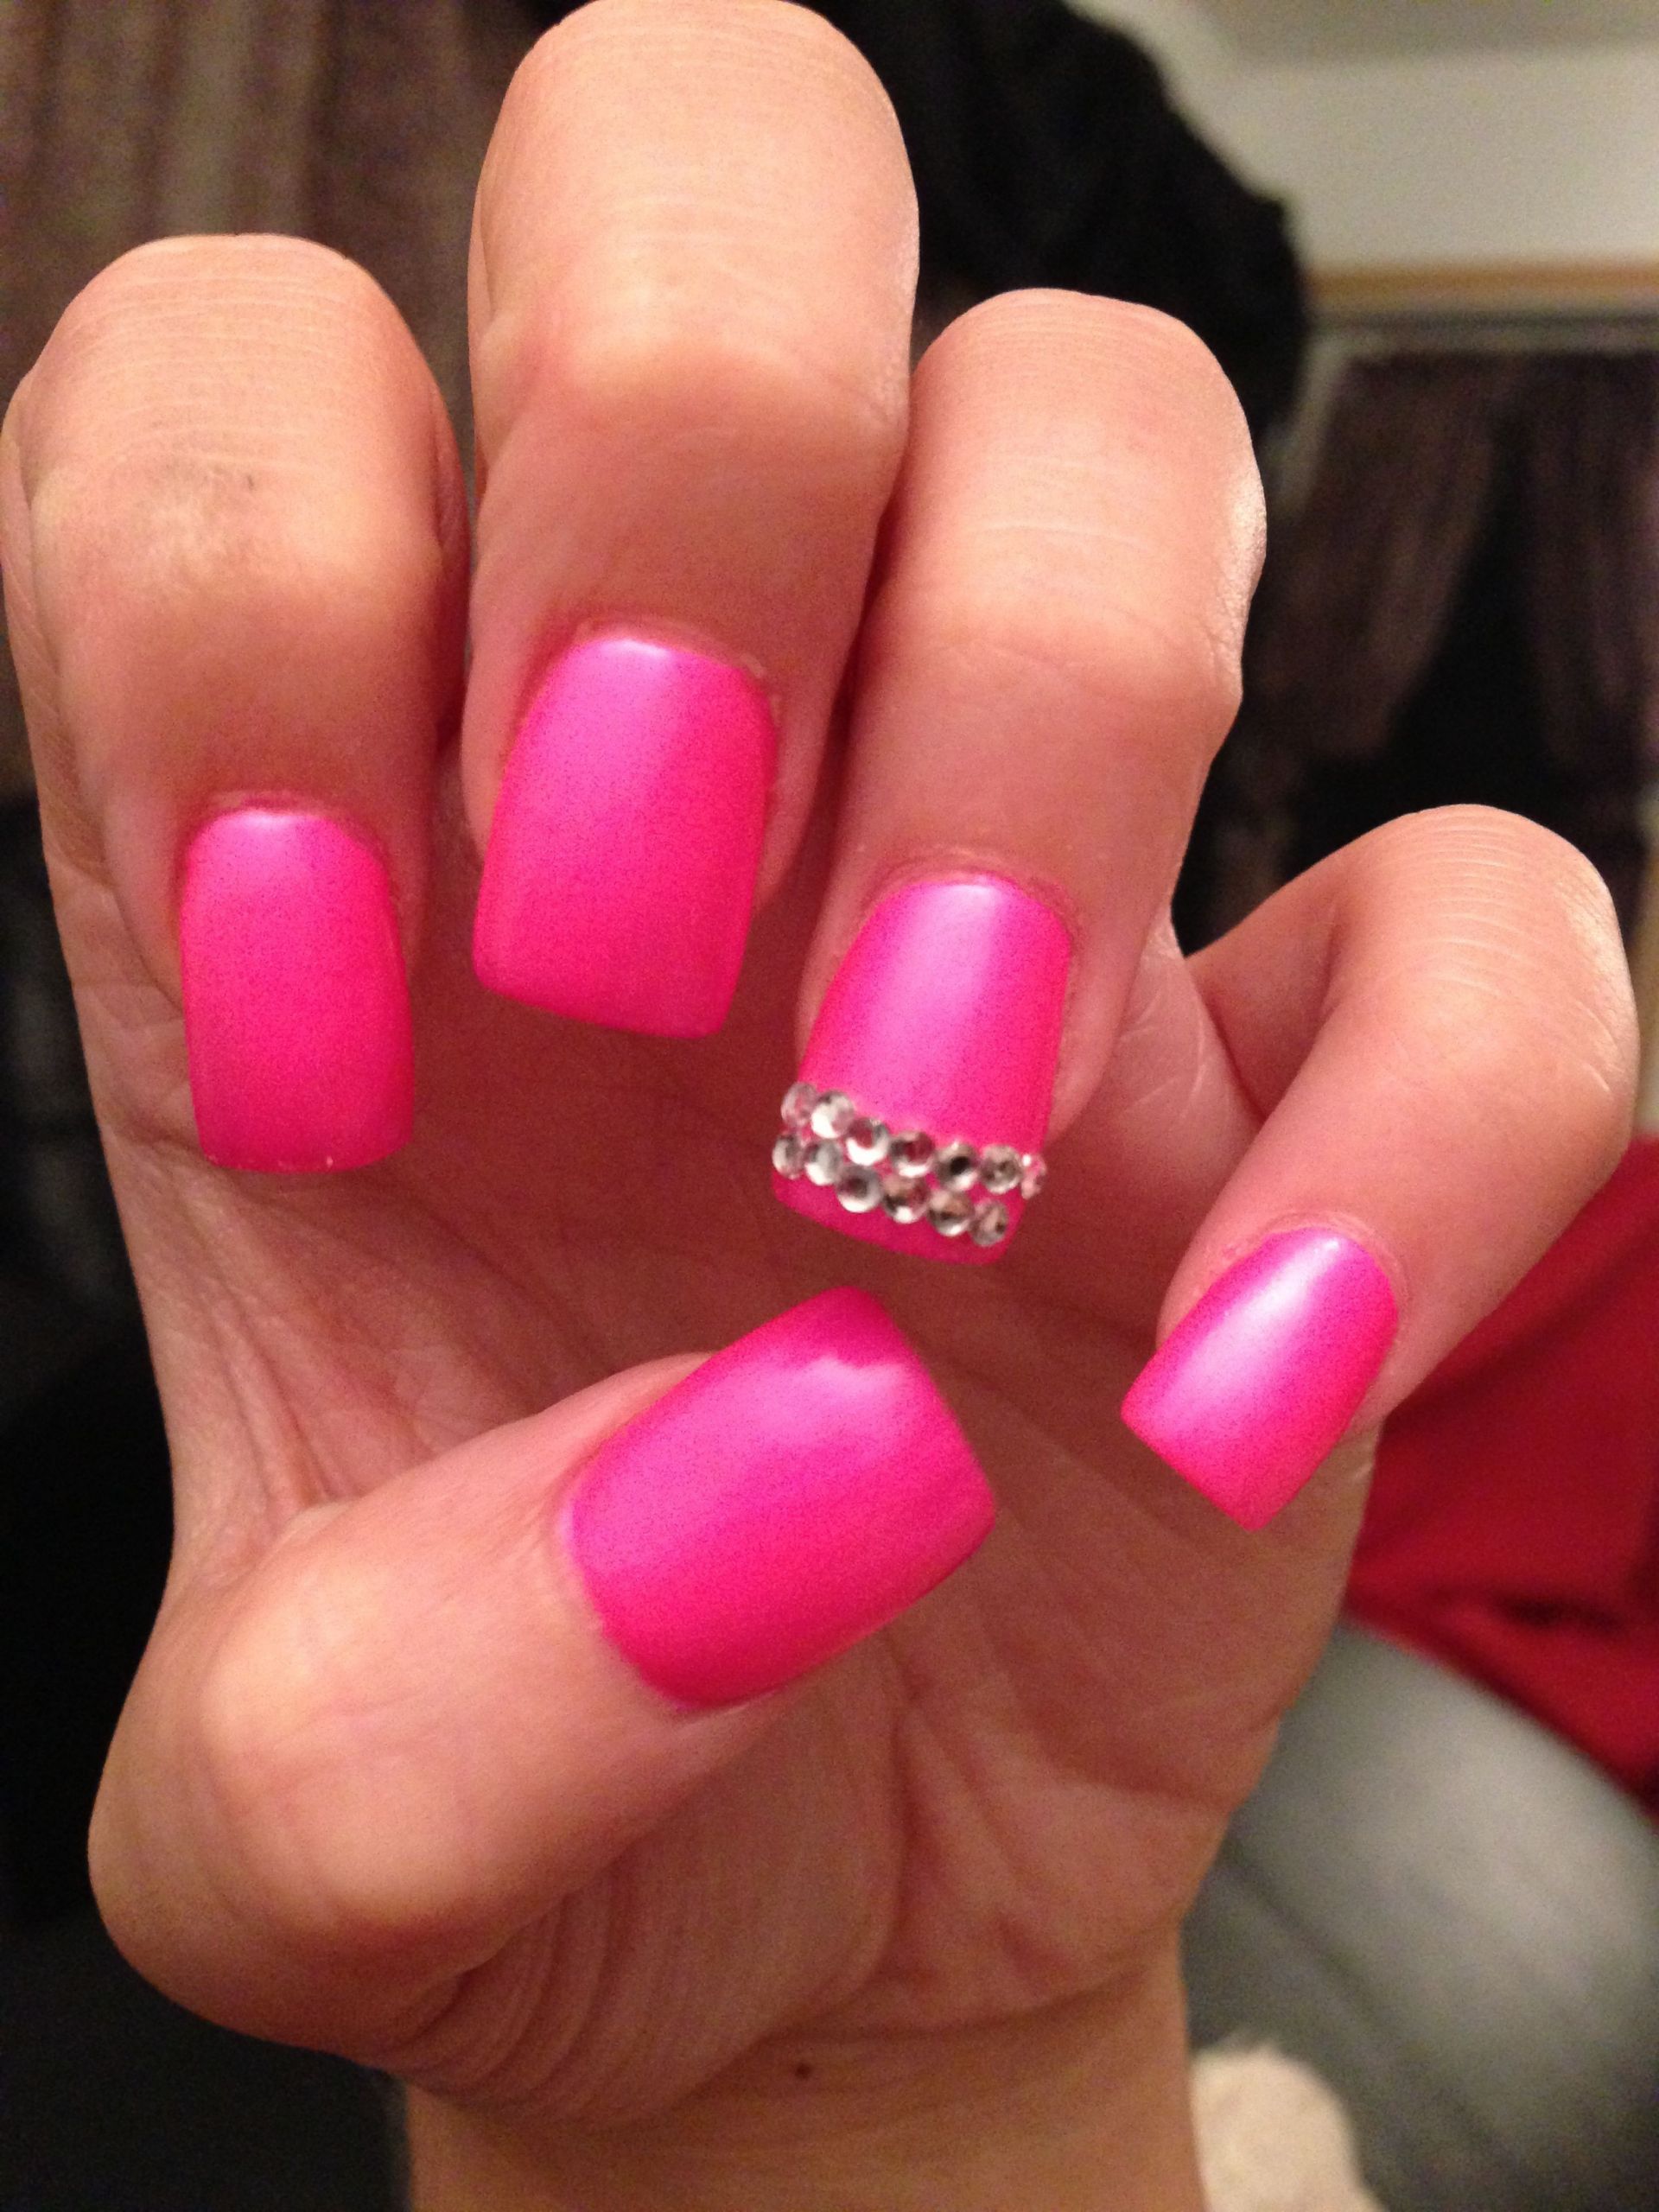 Pink Nail Designs With Rhinestones
 Neon bright pink nails with rhinestones